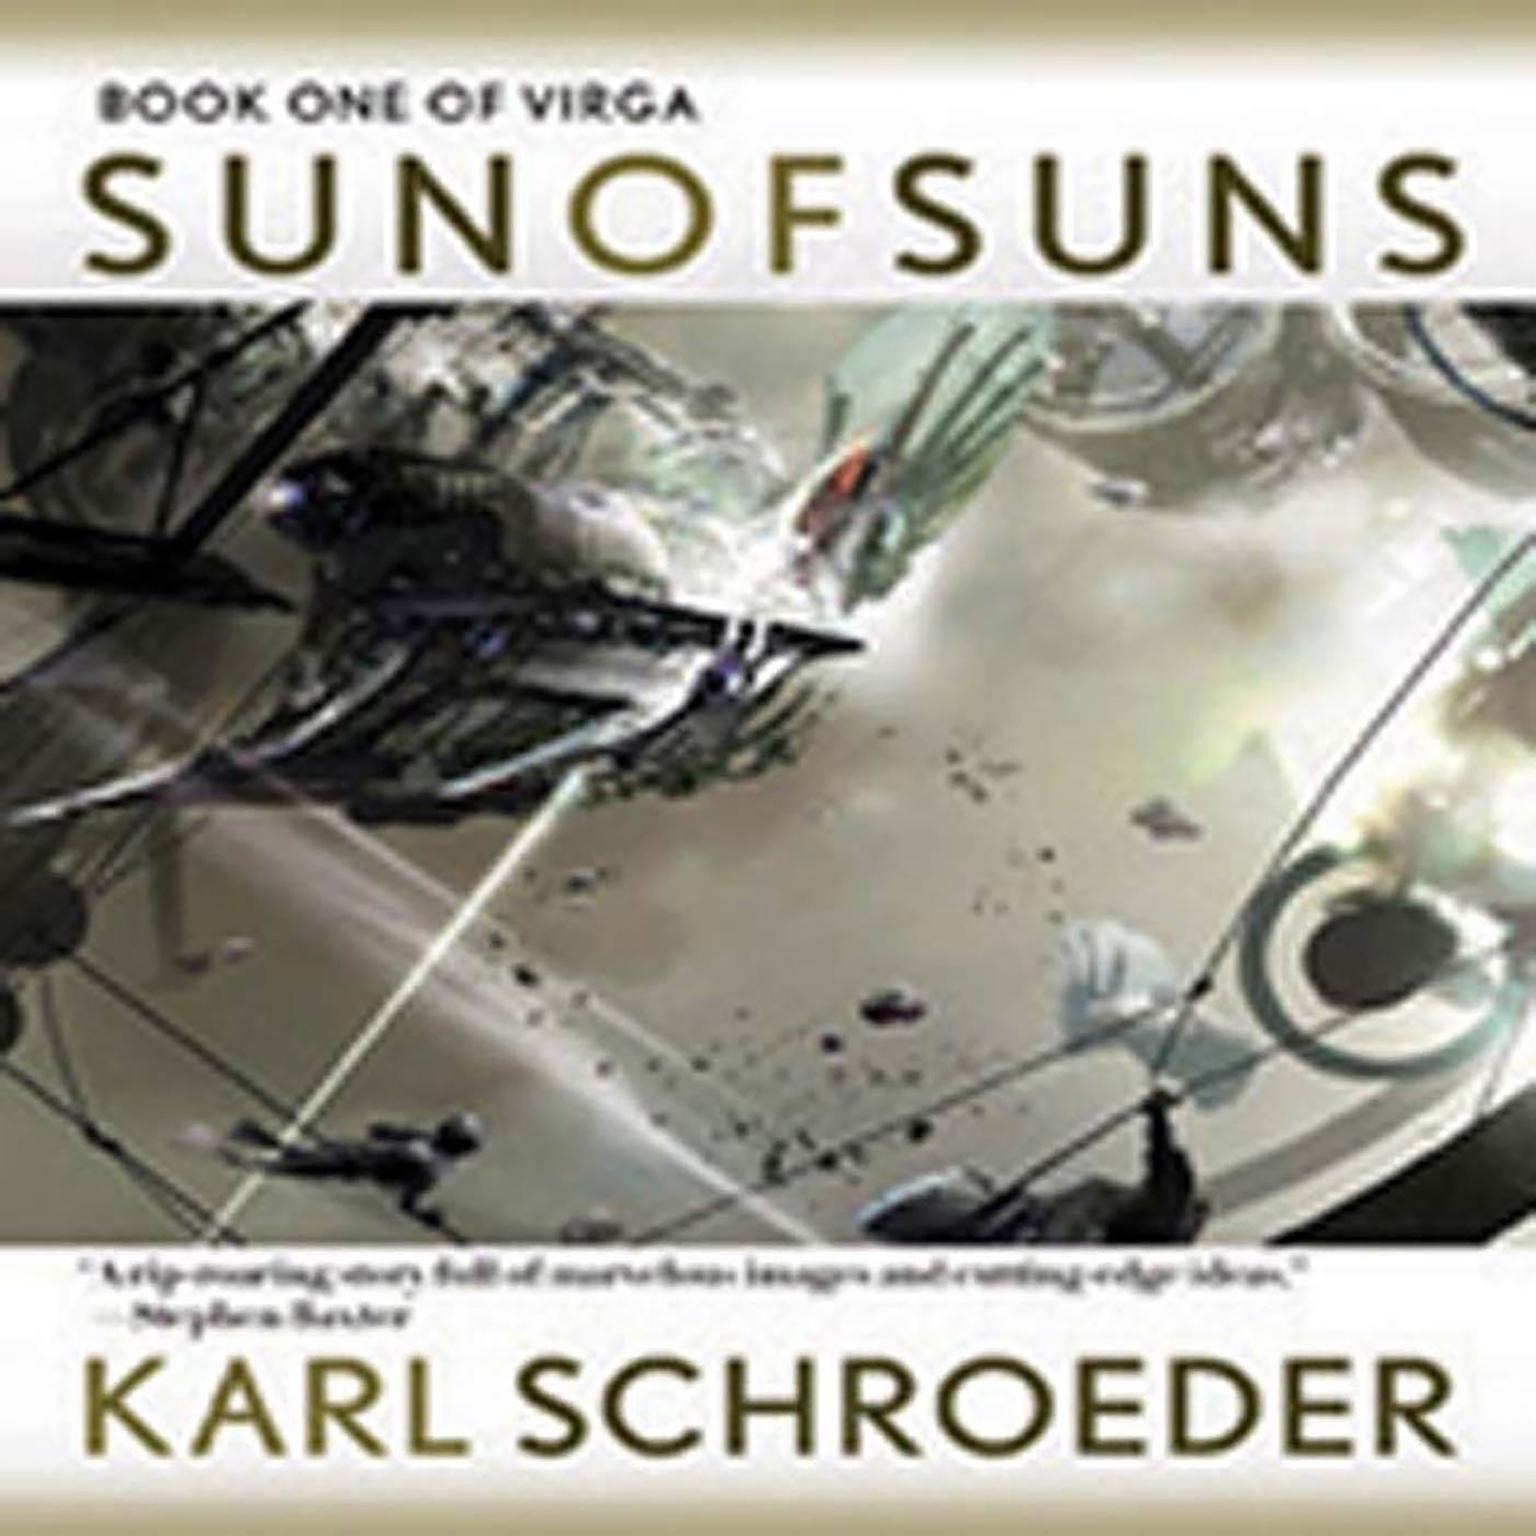 Sun of Suns: Book One of Virga Audiobook, by Karl Schroeder